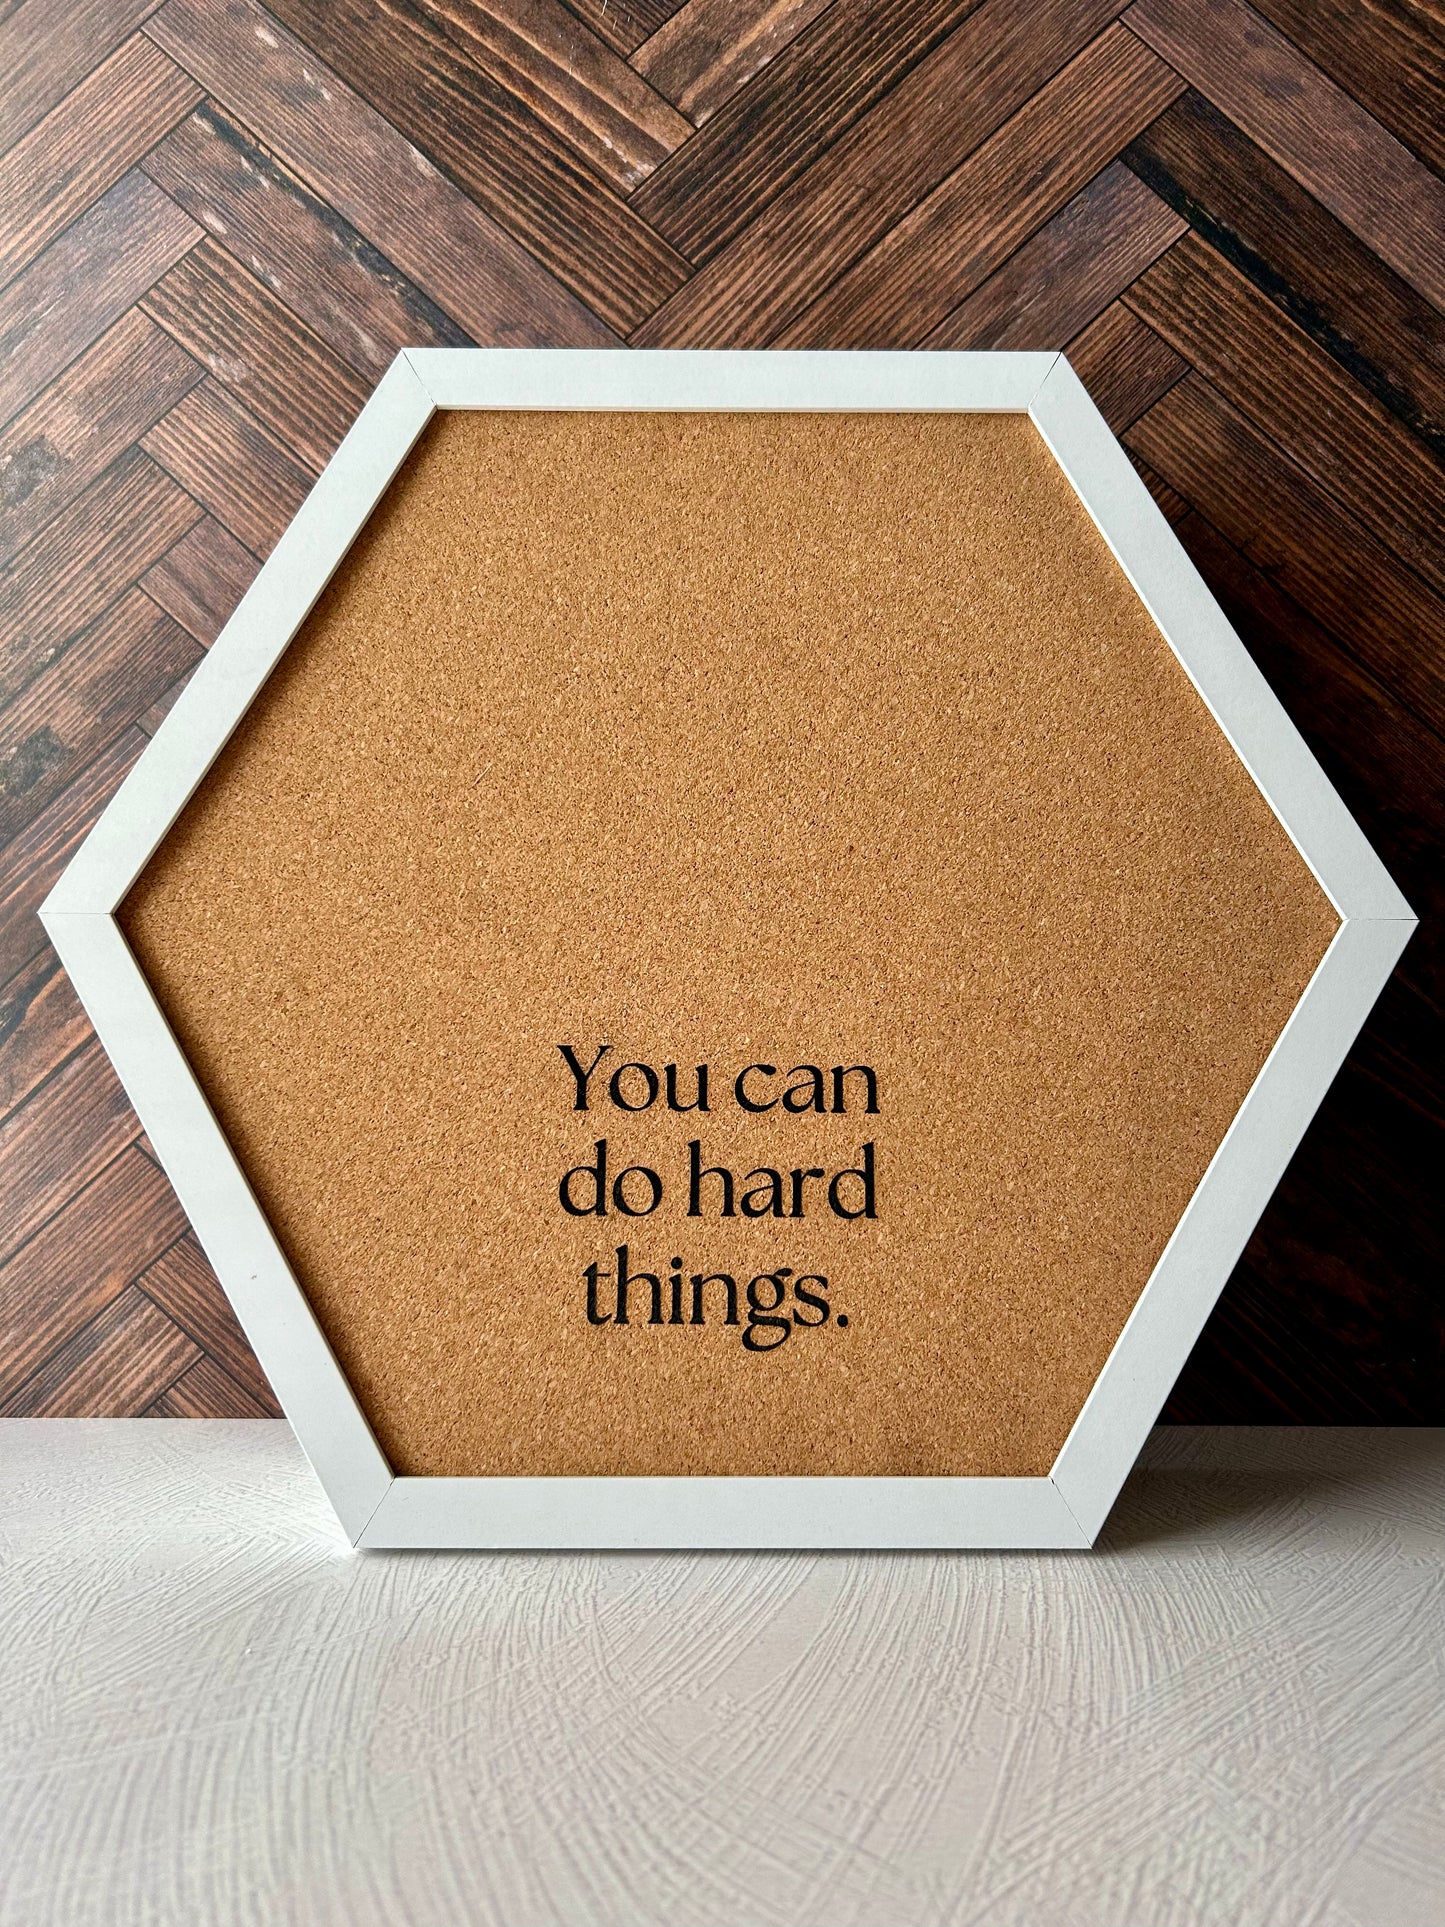 Motivation Station: Customizable Cork Boards for Students and Dreamers